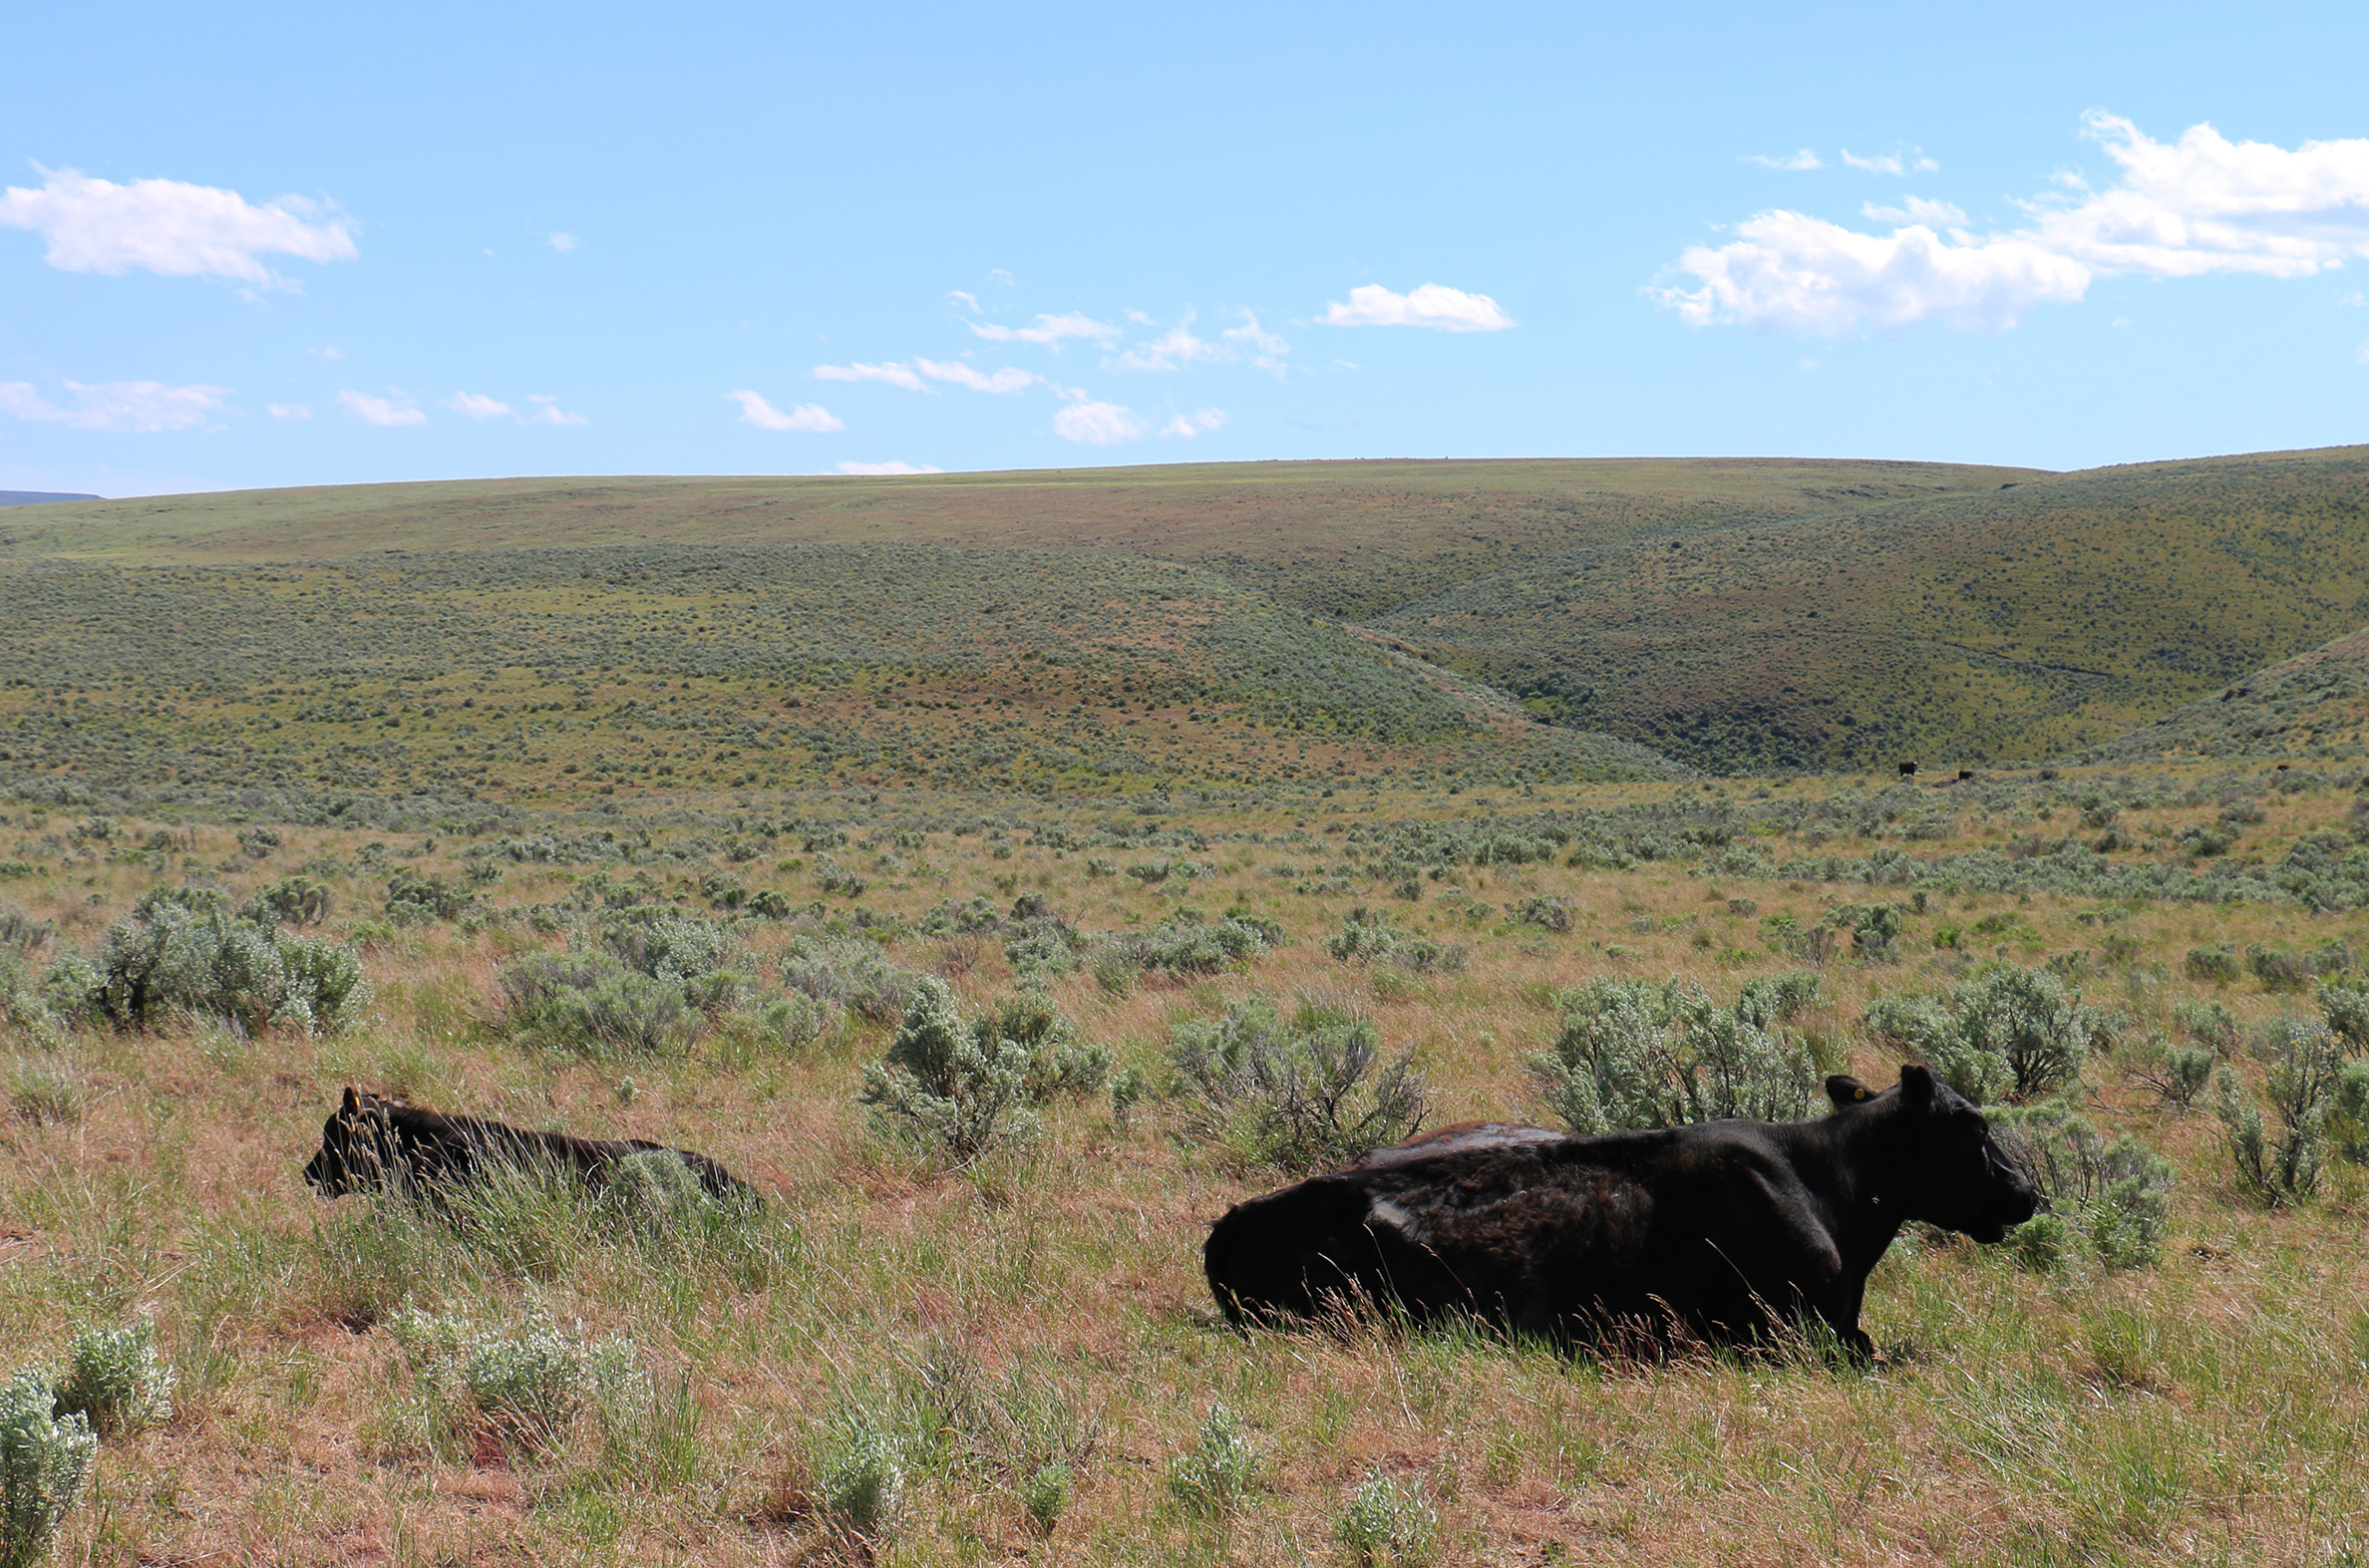 A cow and her calf, both black, lie in the middle of sagebrush and grasses, with the rangeland stretching away to the horizon.